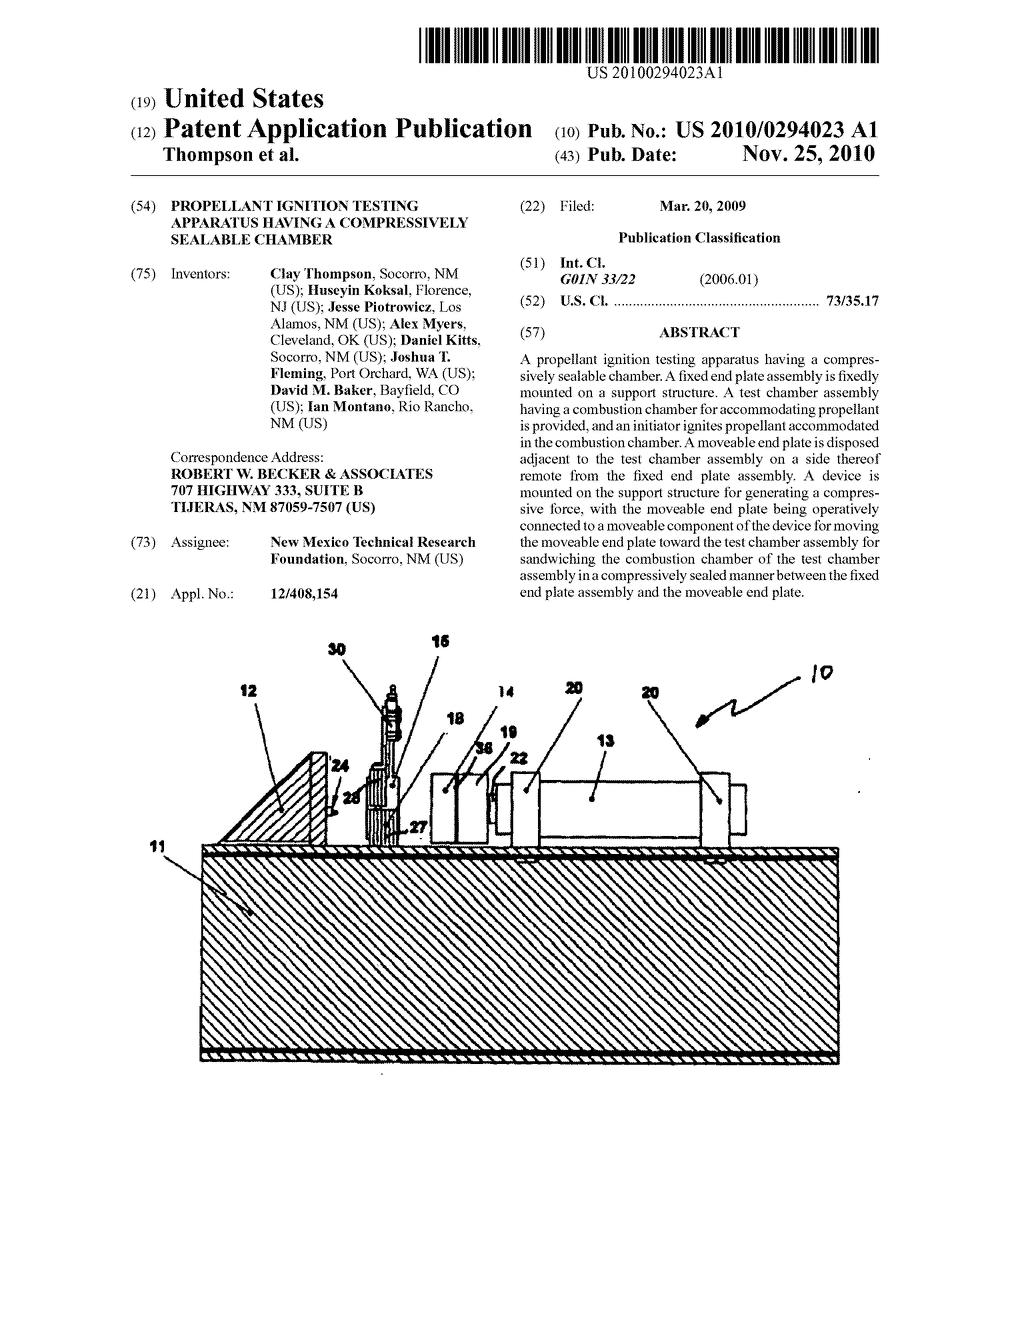 Propellant Ignition Testing Apparatus Having a Compressively Sealable Chamber - diagram, schematic, and image 01